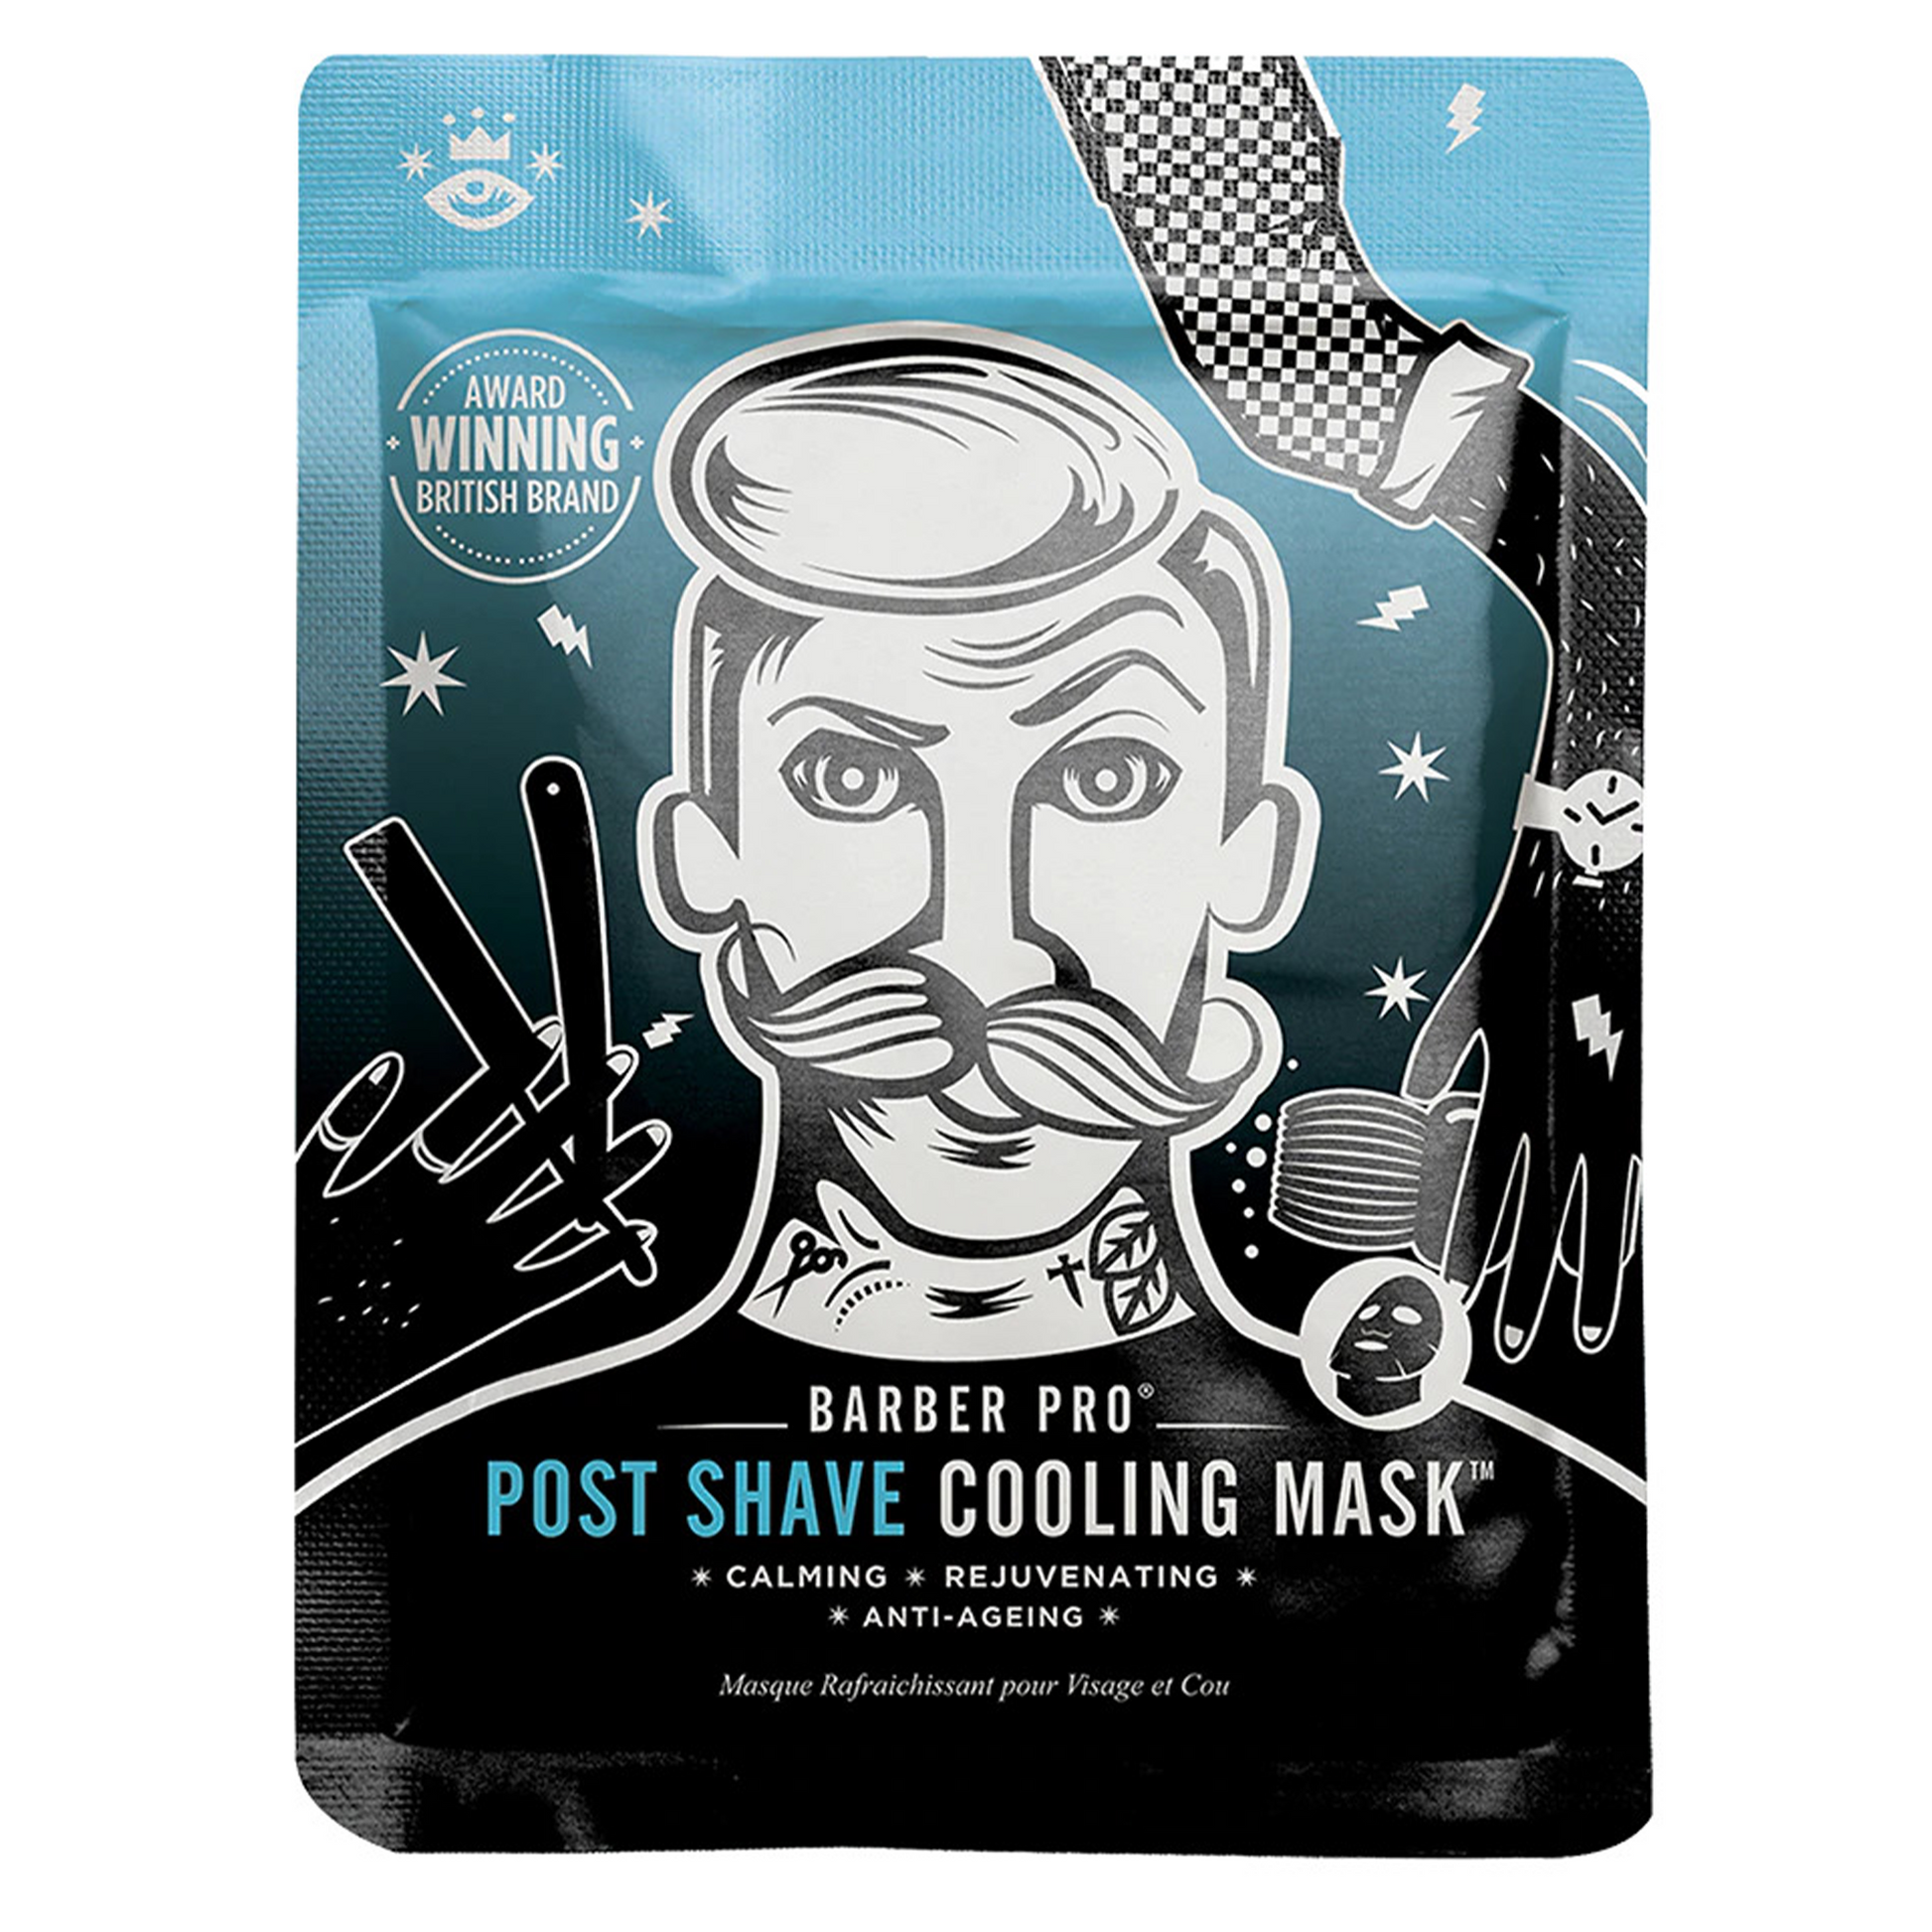 Barber Pro Post Shave Cooling Mask: The BARBER PRO Post Shave Cooling Mask with Anti-Ageing Collagen calms and soothes your shaven skin while nourishing the area, leaving you looking fresh faced!  The BARBER PRO Post Shave Cooling Mask reduces the irritation and redness caused by your razor! The serum will cool the skin, as well as hydrating and nourishing the area, leaving your skin feeling refreshed and smooth.